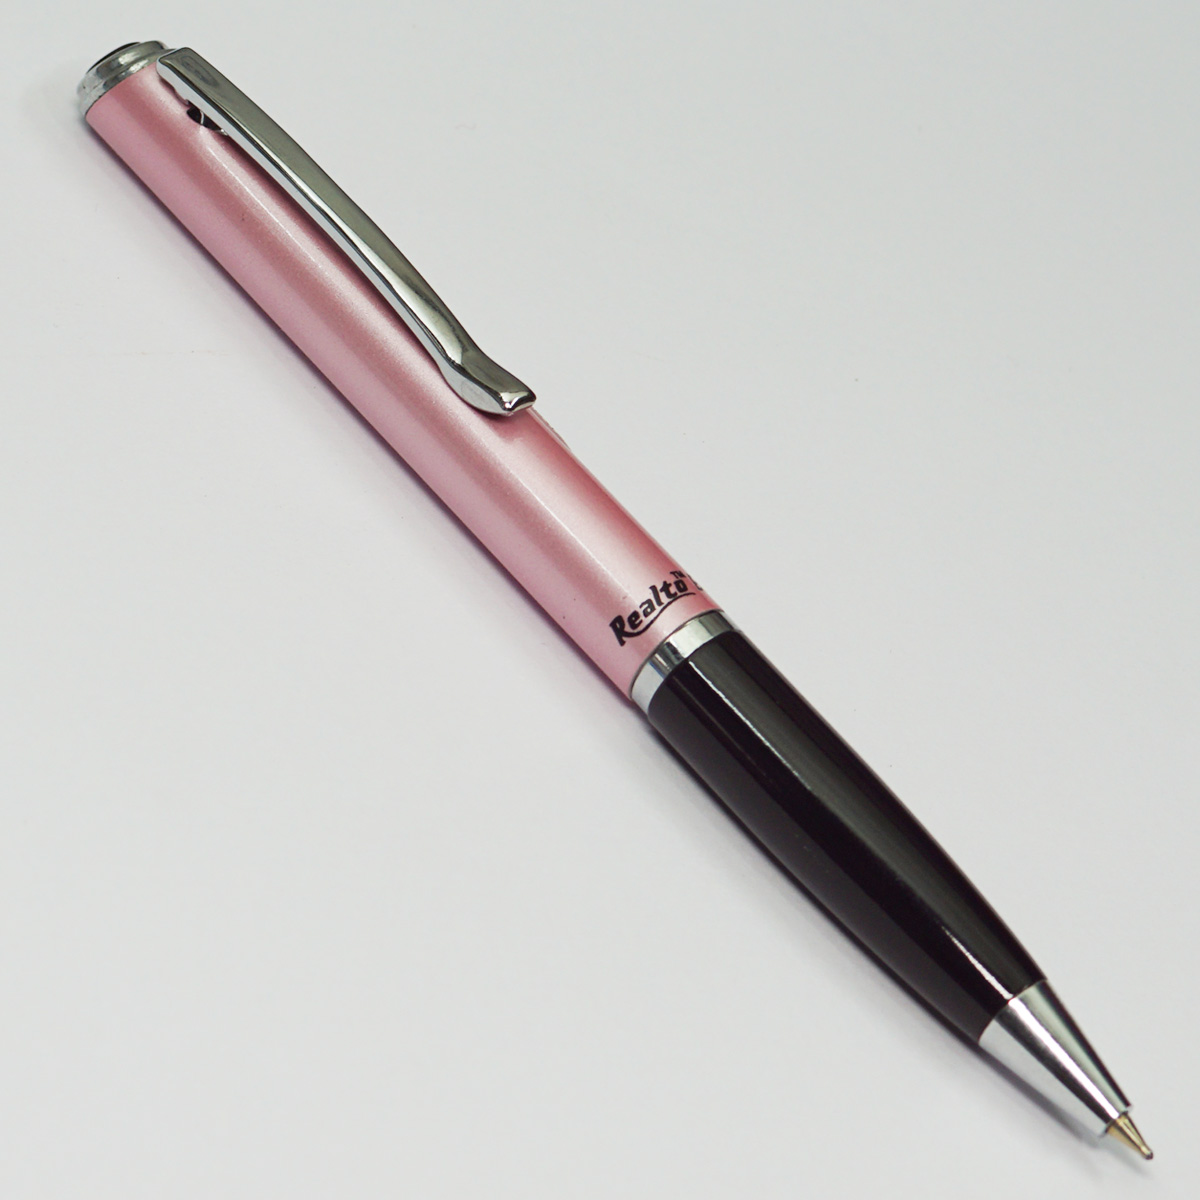 Realto Eagle Pink Color Body With Black Grip Fine Tip Twist Type Ball Pen SKU 22814